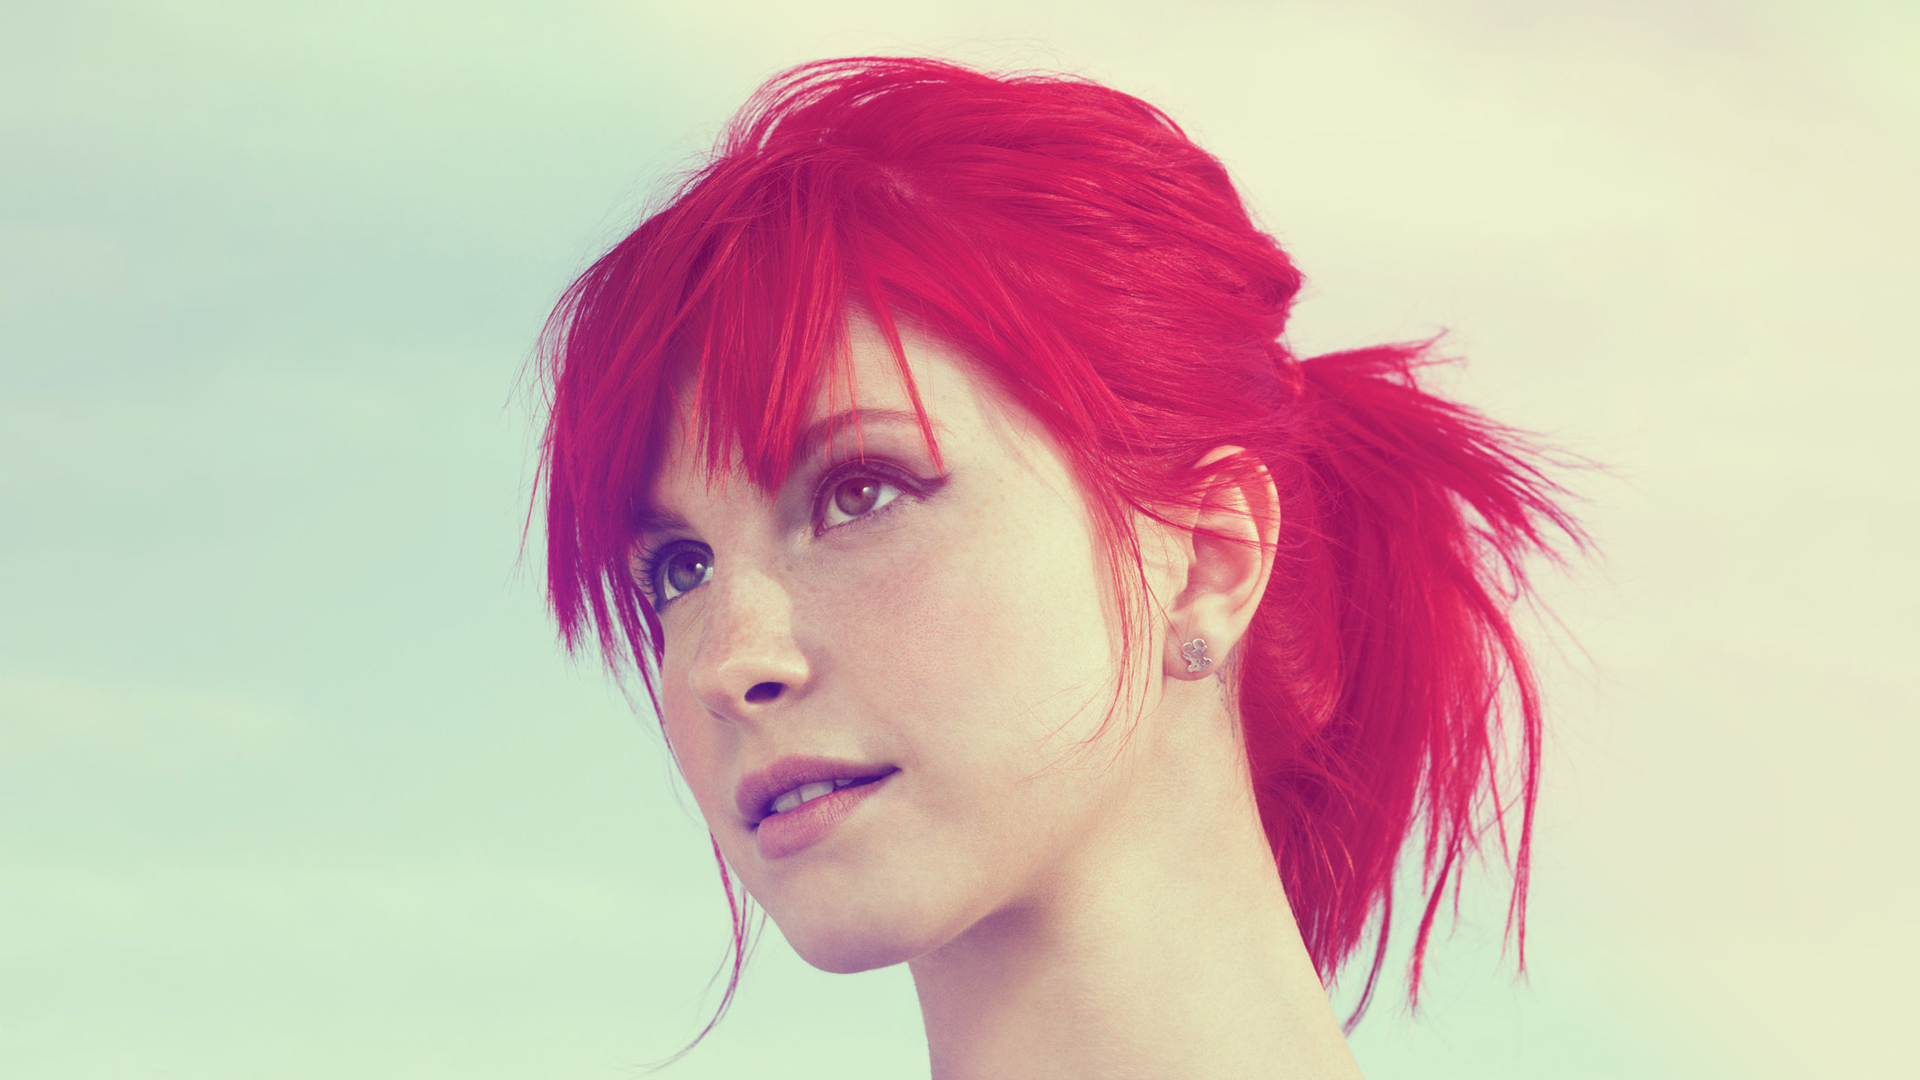 People 1920x1080 Hayley Williams redhead women face singer dyed hair freckles looking into the distance simple background closeup studio